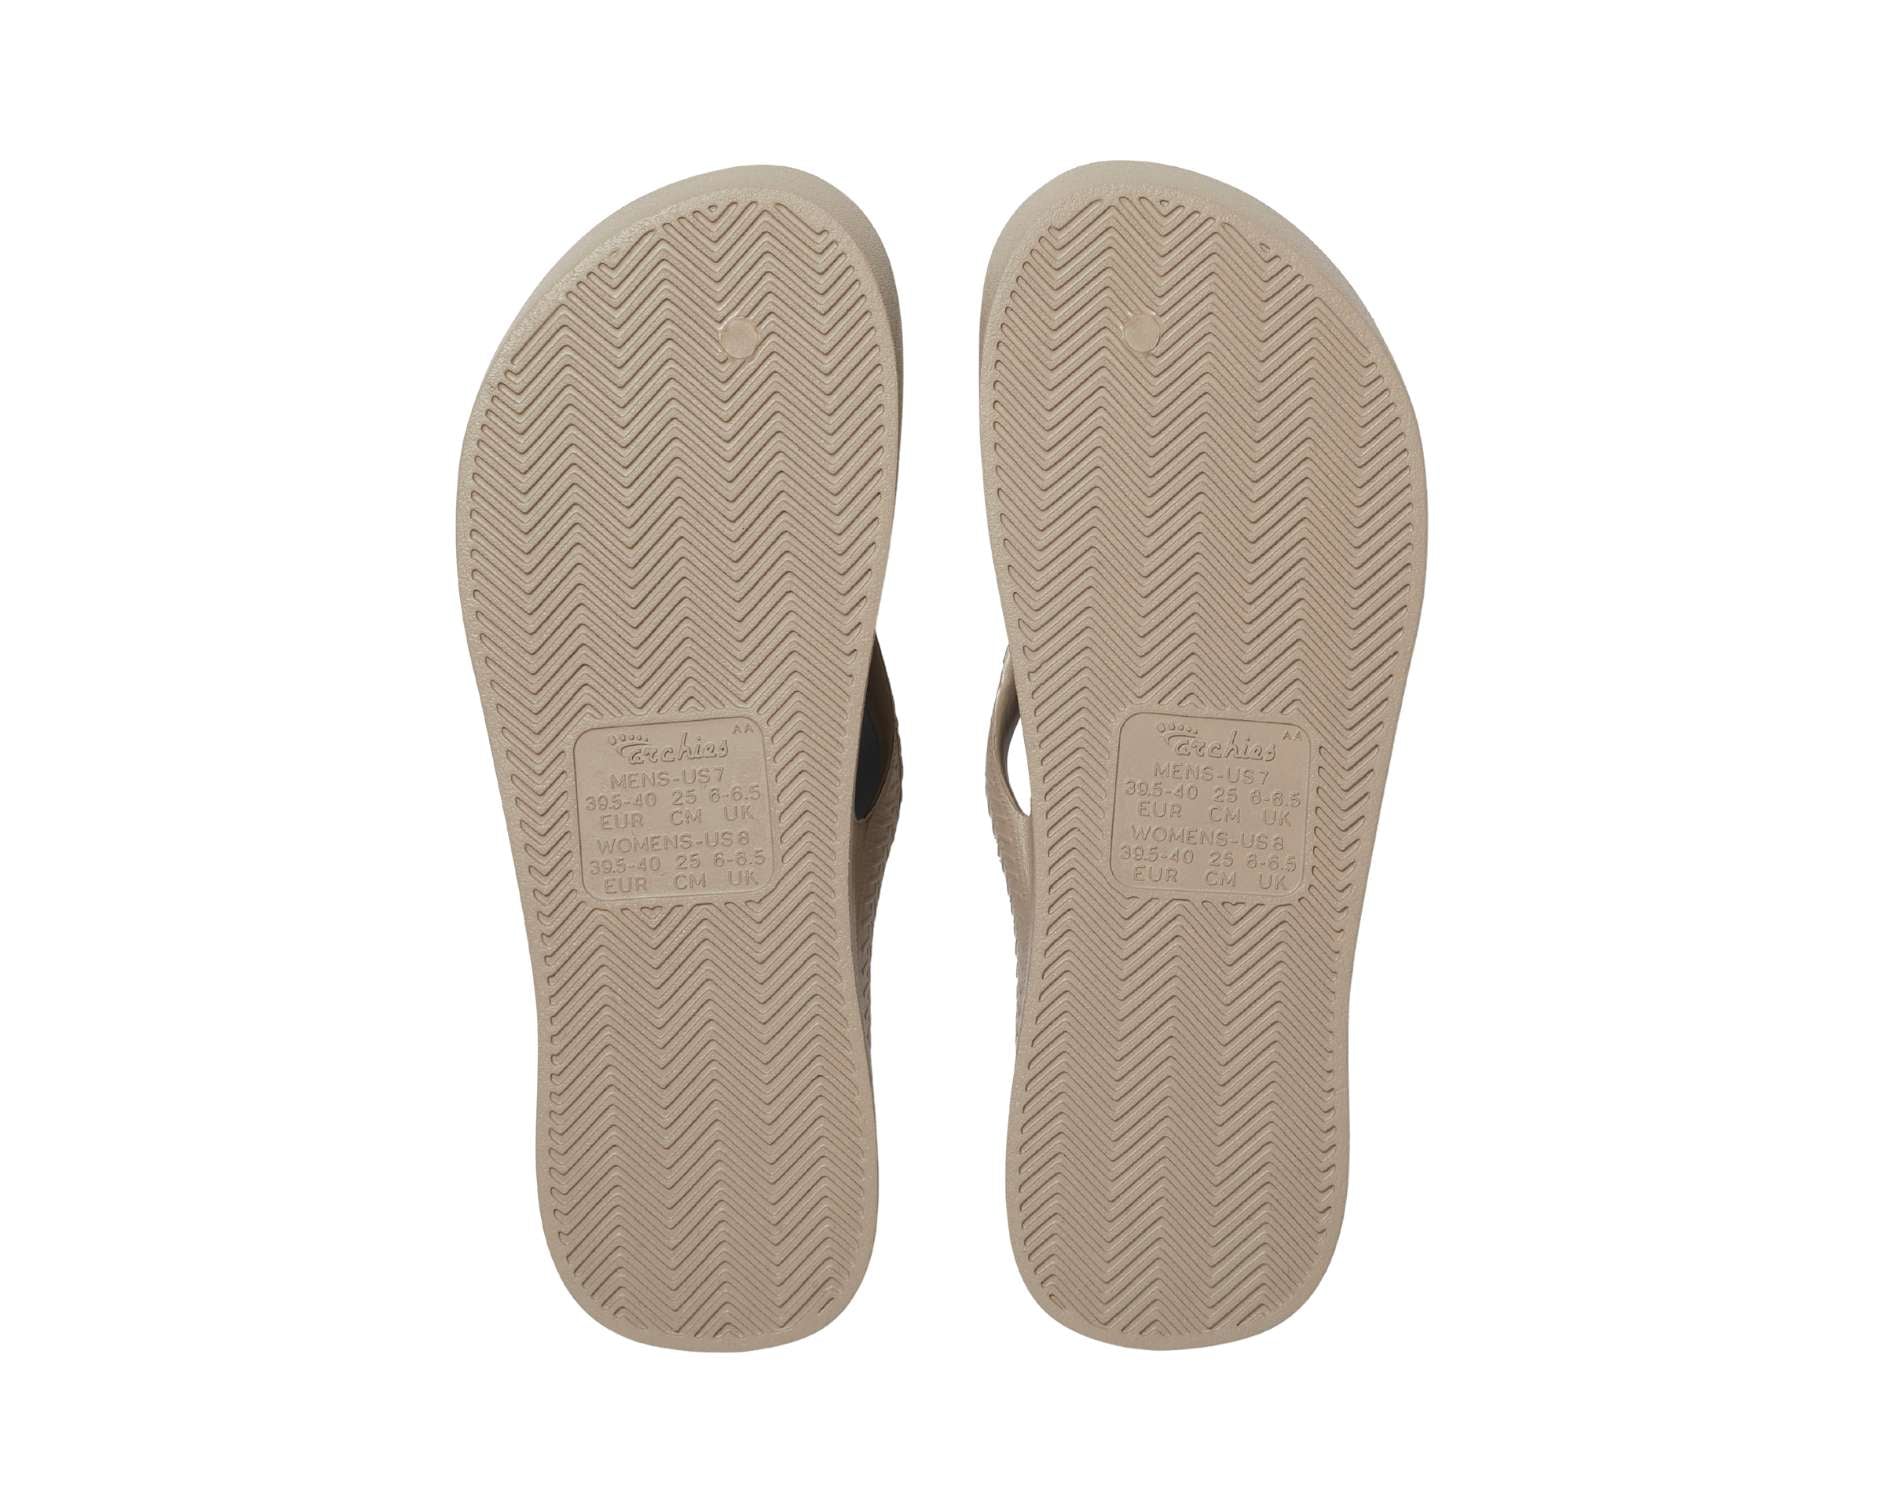 Archies arch support thongs in taupe colour